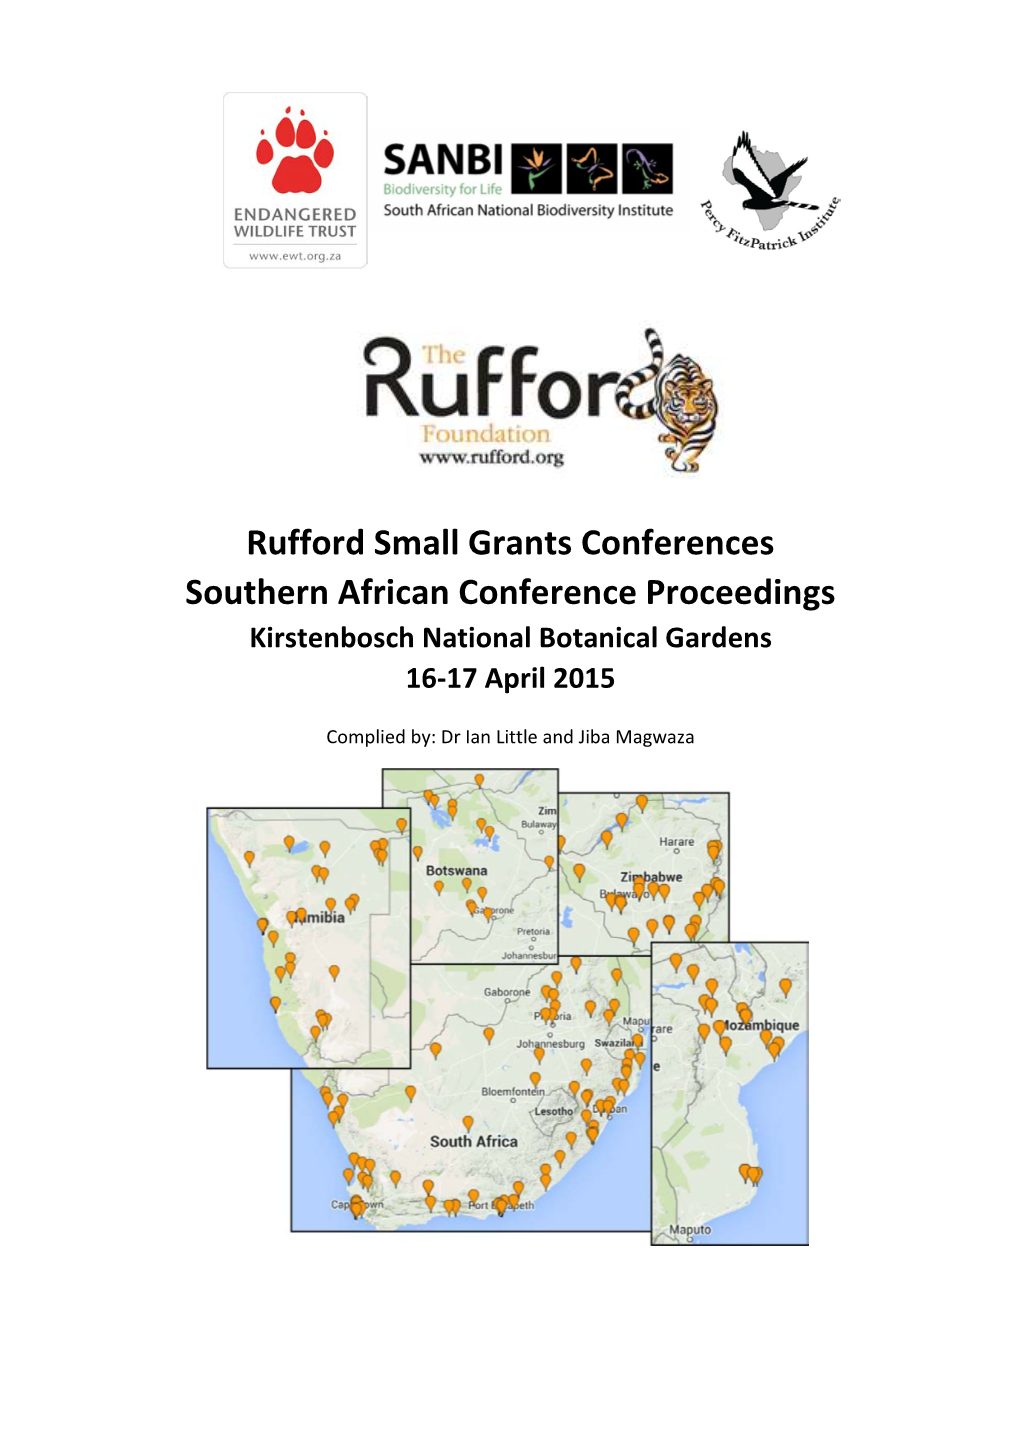 Rufford Small Grants Conferences Southern African Conference Proceedings Kirstenbosch National Botanical Gardens 16-17 April 2015